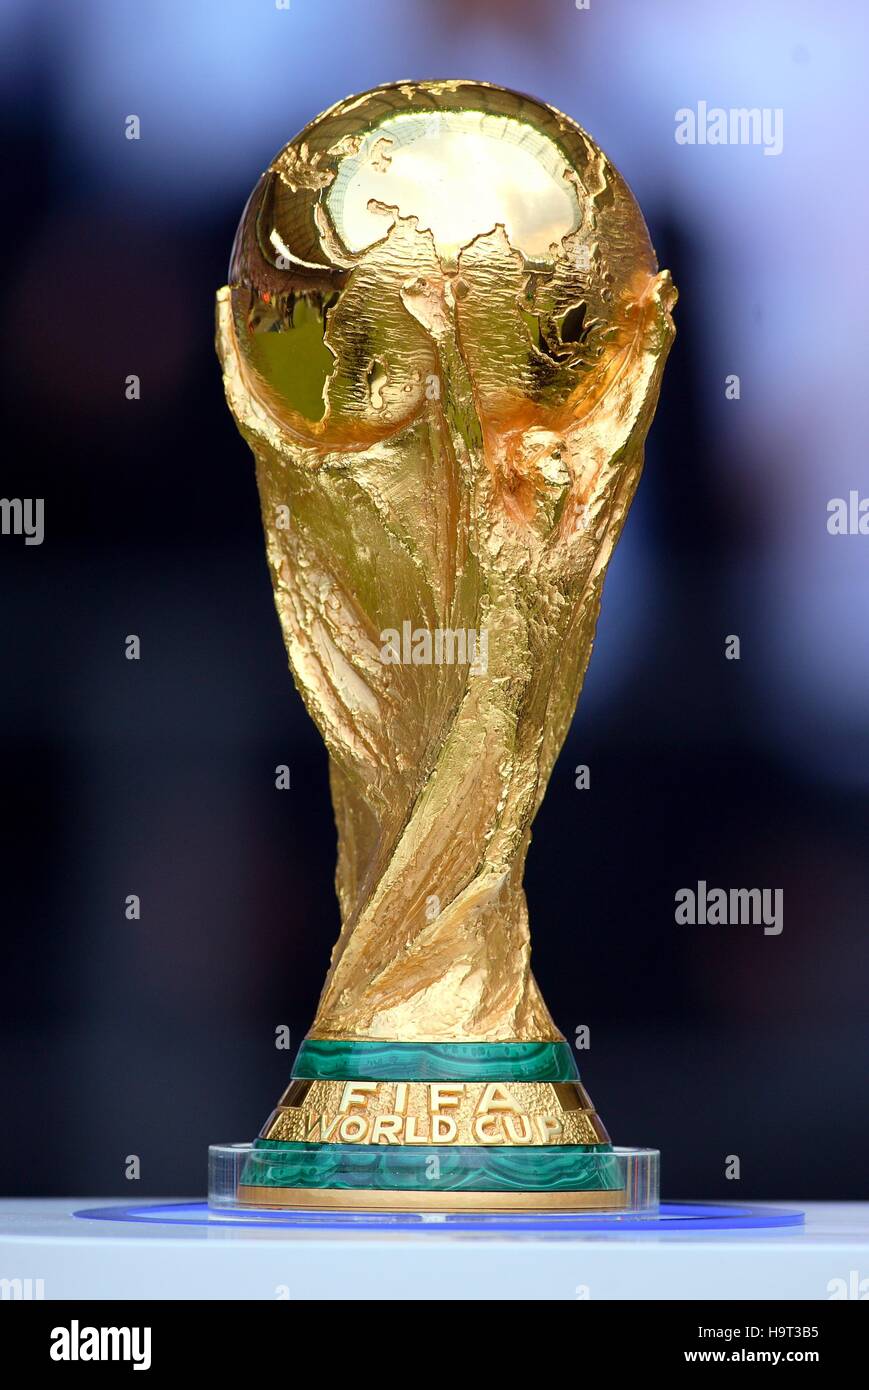 World cup trophy Stock Photos, Royalty Free World cup trophy